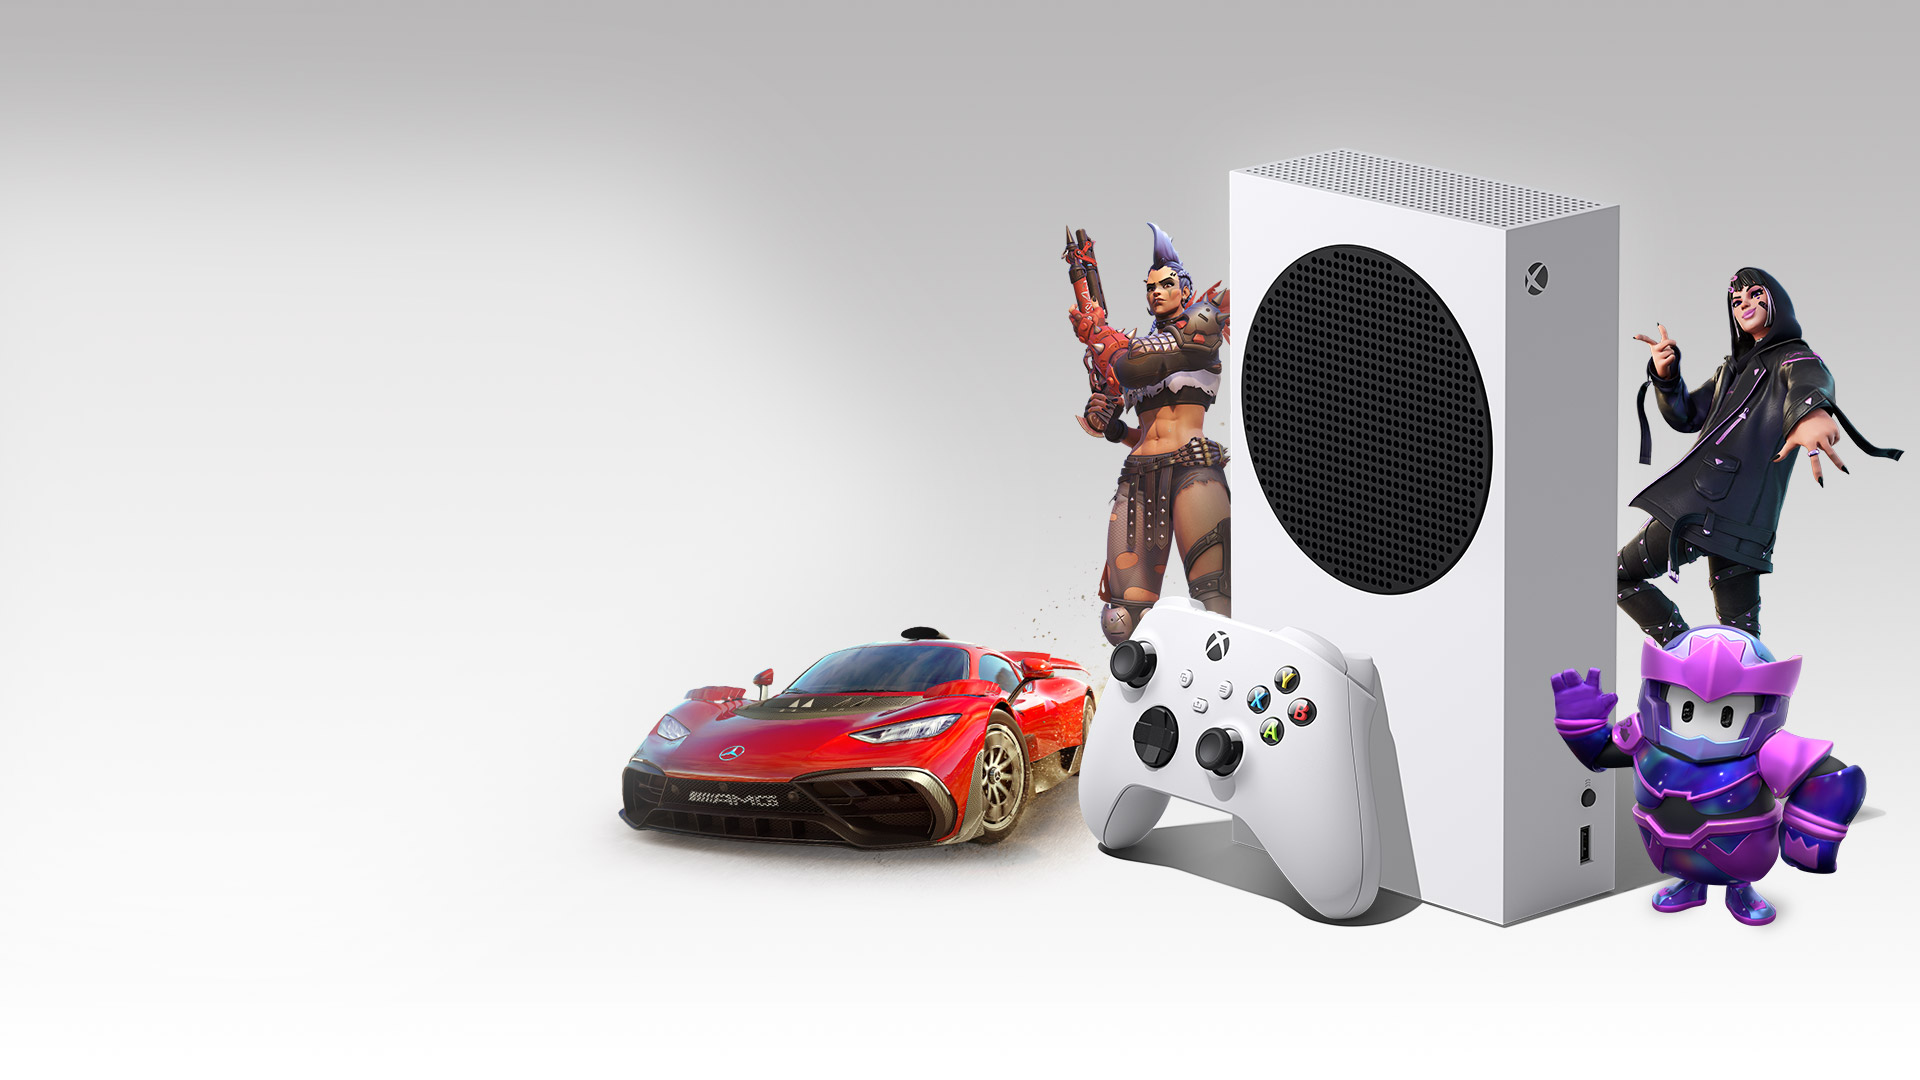 An Xbox Series S surrounded by characters from Overwatch 2, Fortnite, Fall Guys and the Mercedes-AMG One from Forza Horizon 5.